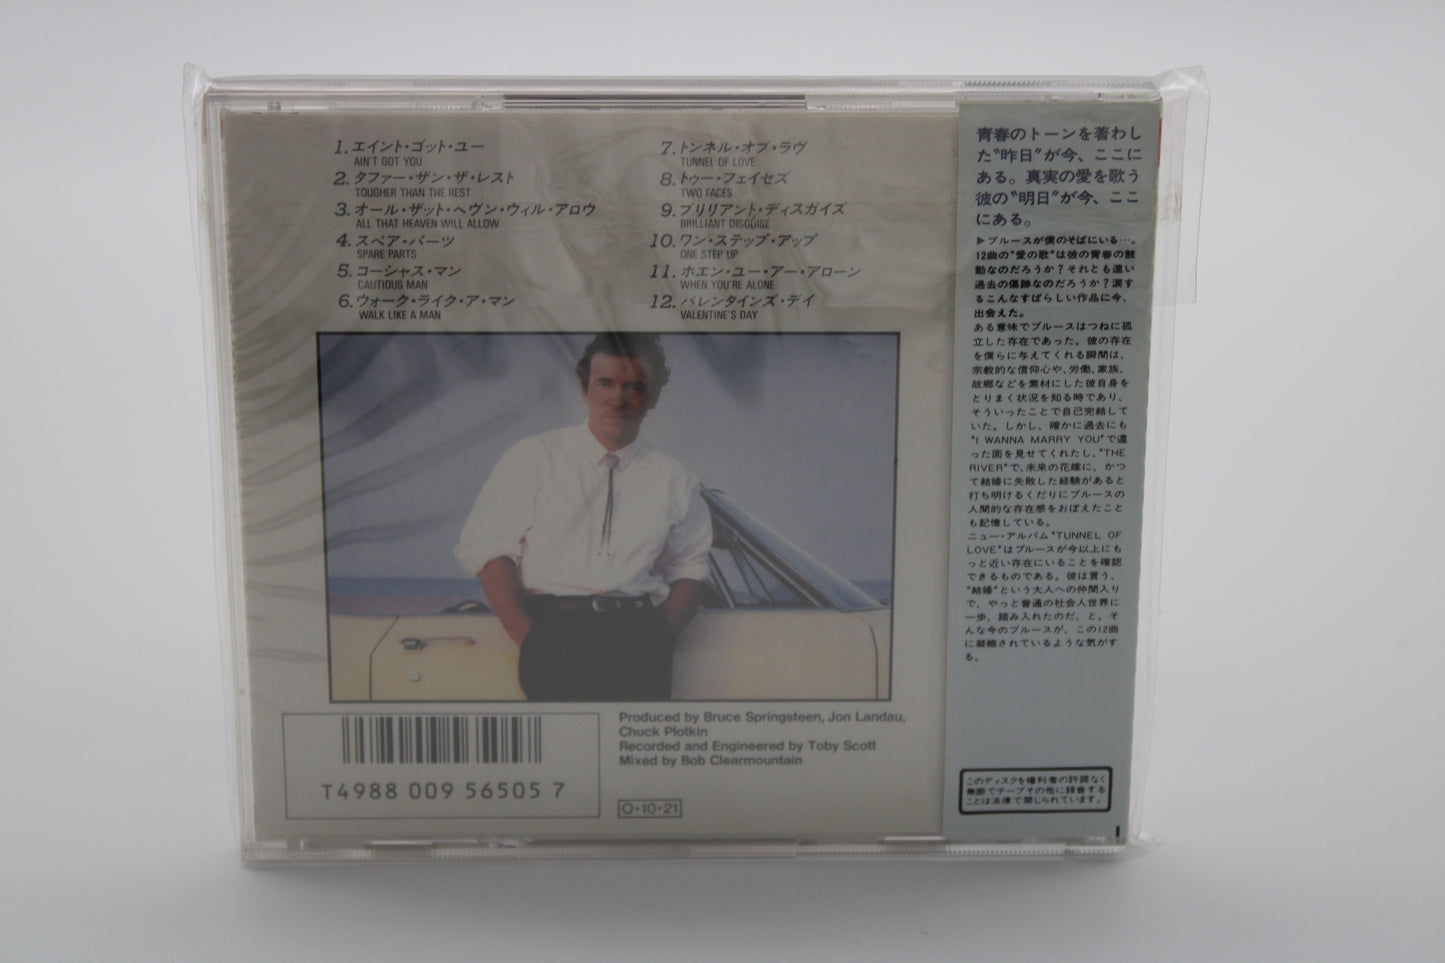 Bruce Springsteen Tunnel Of Love First Press CD/Japan Release 1987 w/OBI Collectible